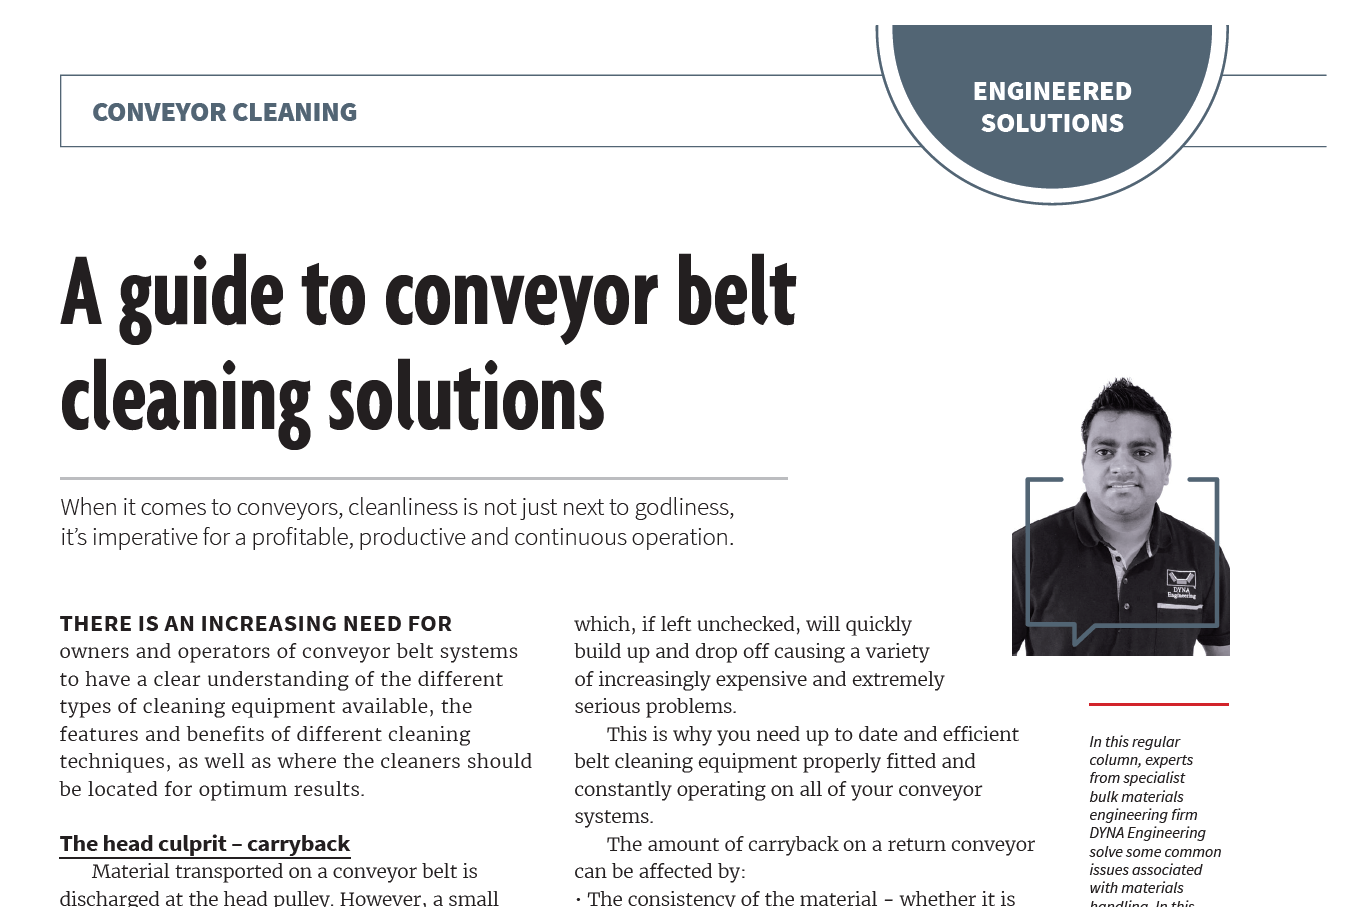 Australian Bulk Handling Review A guide to conveyor belt cleaning solutions DYNA Engineering January February 2019